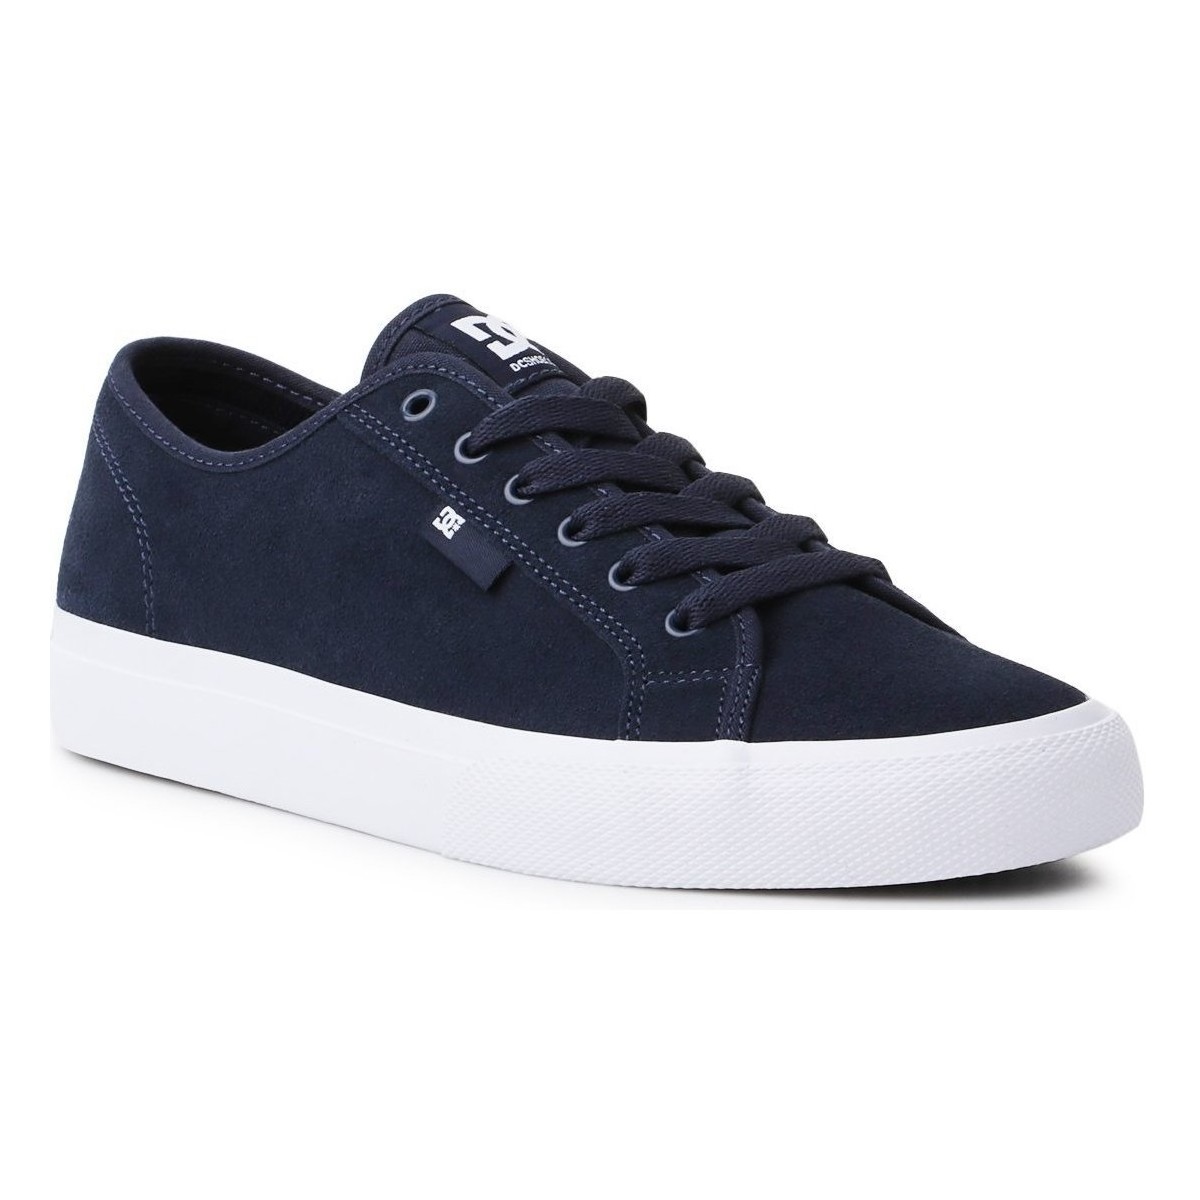 Chaussures Homme Chaussures de Skate DC Shoes DC Manual S ADYS300637-DNW Bleu